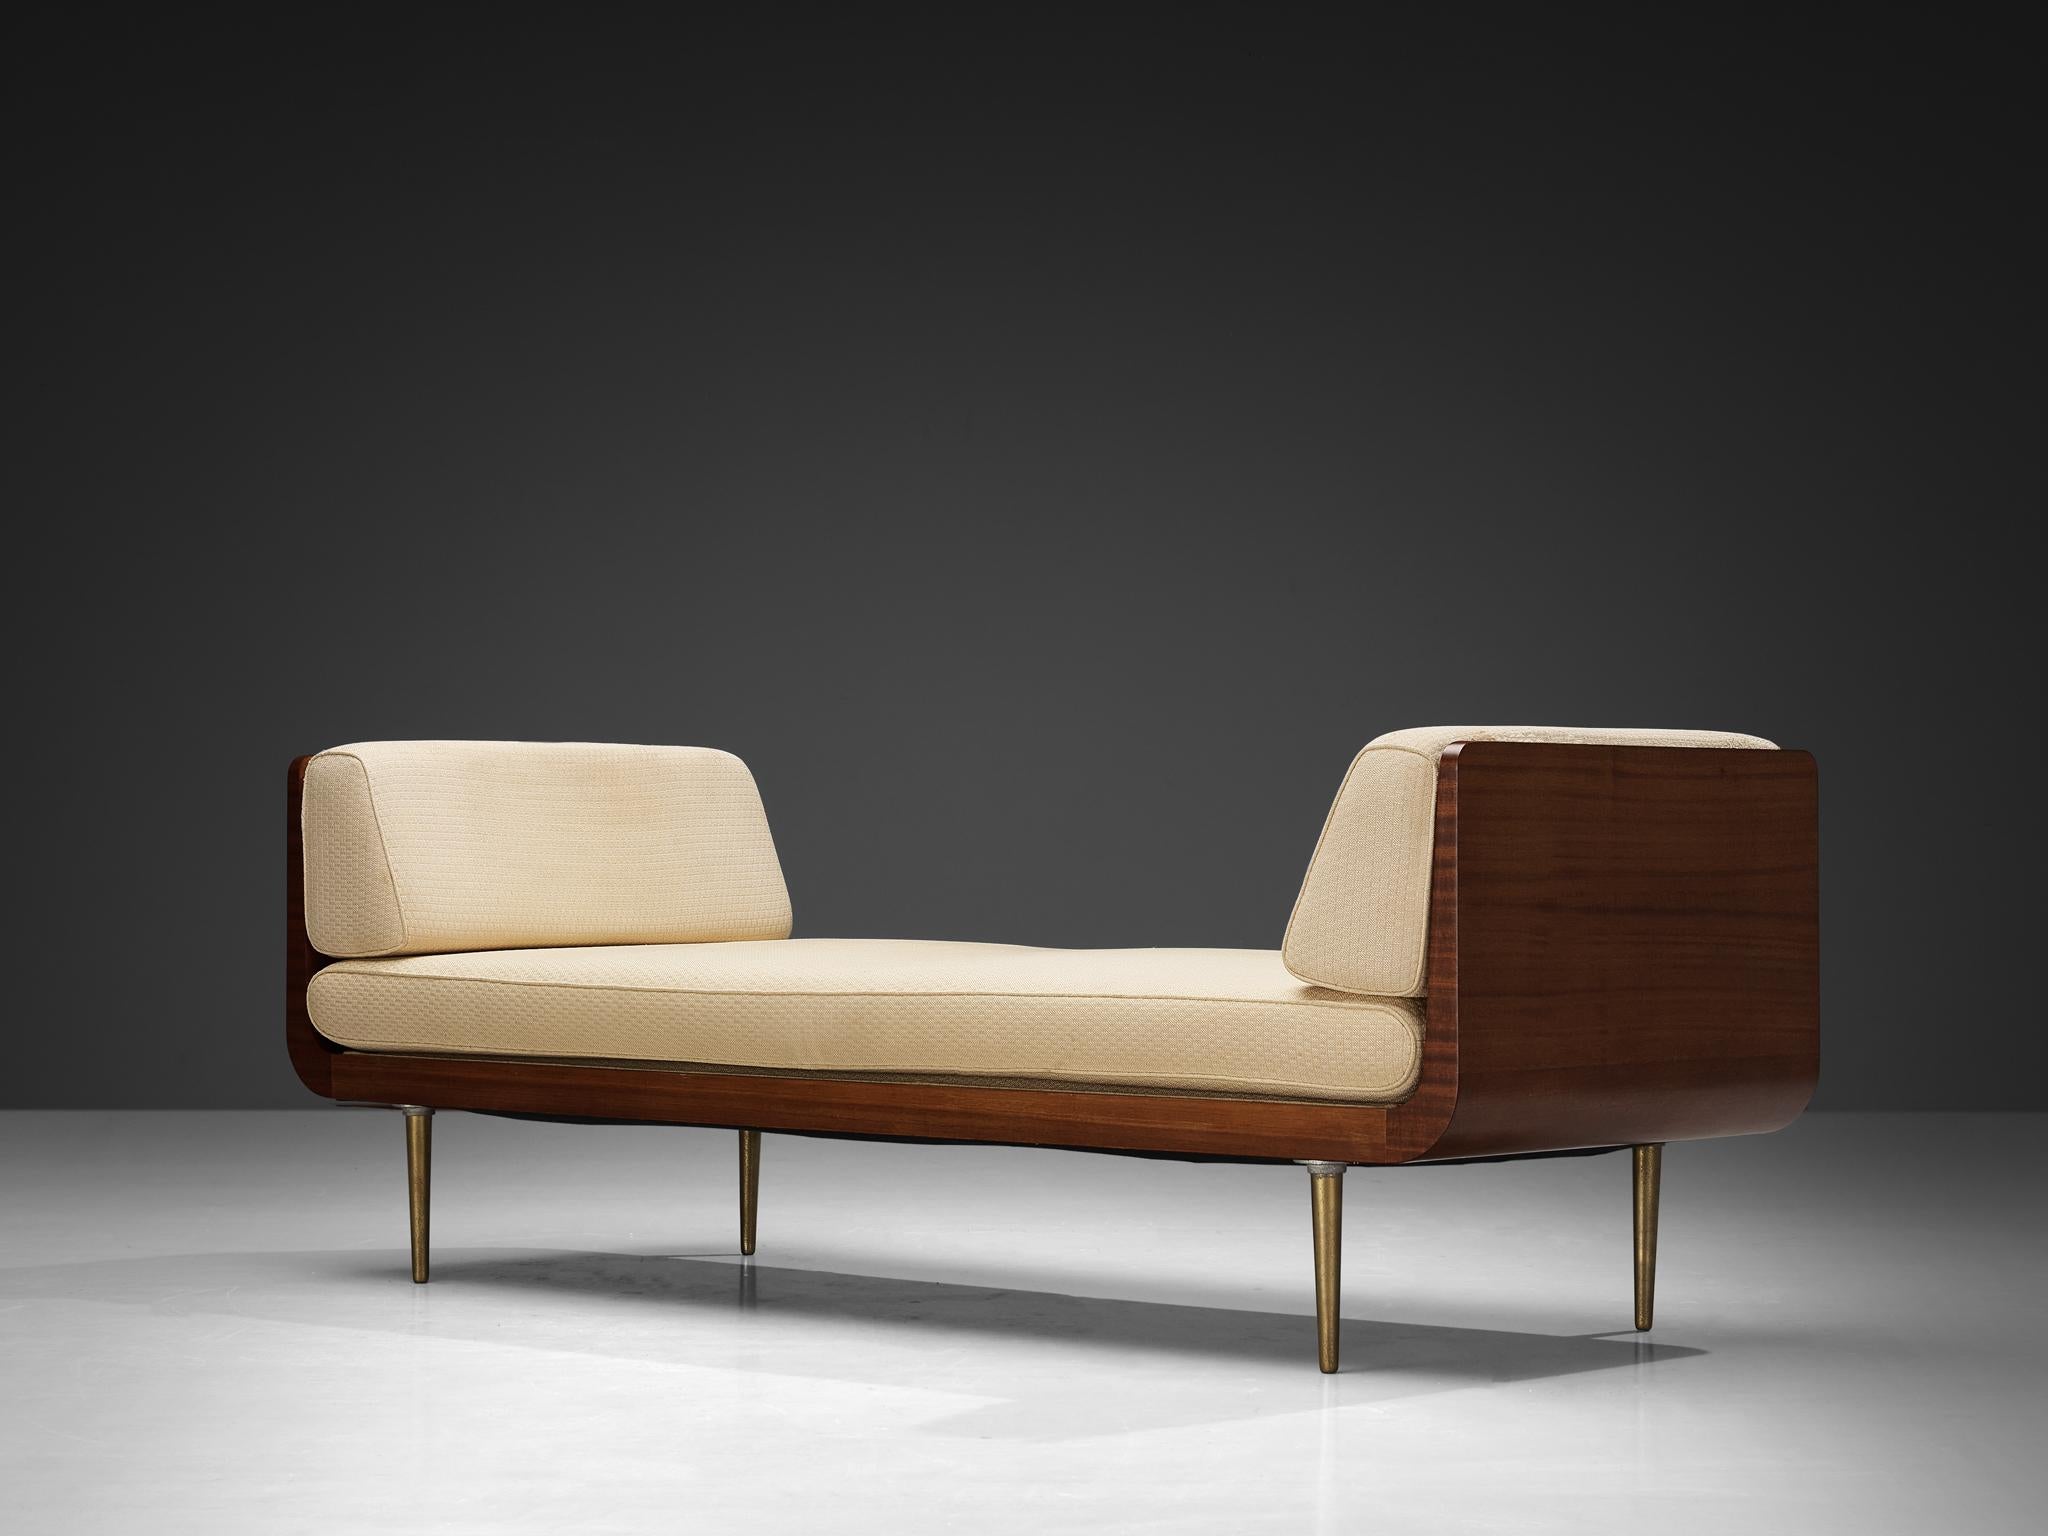 Edward Wormley for Dunbar, daybed, mahogany, fabric, metal, United States, 1950s.

A daybed designed by Edward Wormley for Dunbar in mahogany. The sculpted frame shows beautiful lines and forms up at its end. The two cushions as well as the mattress